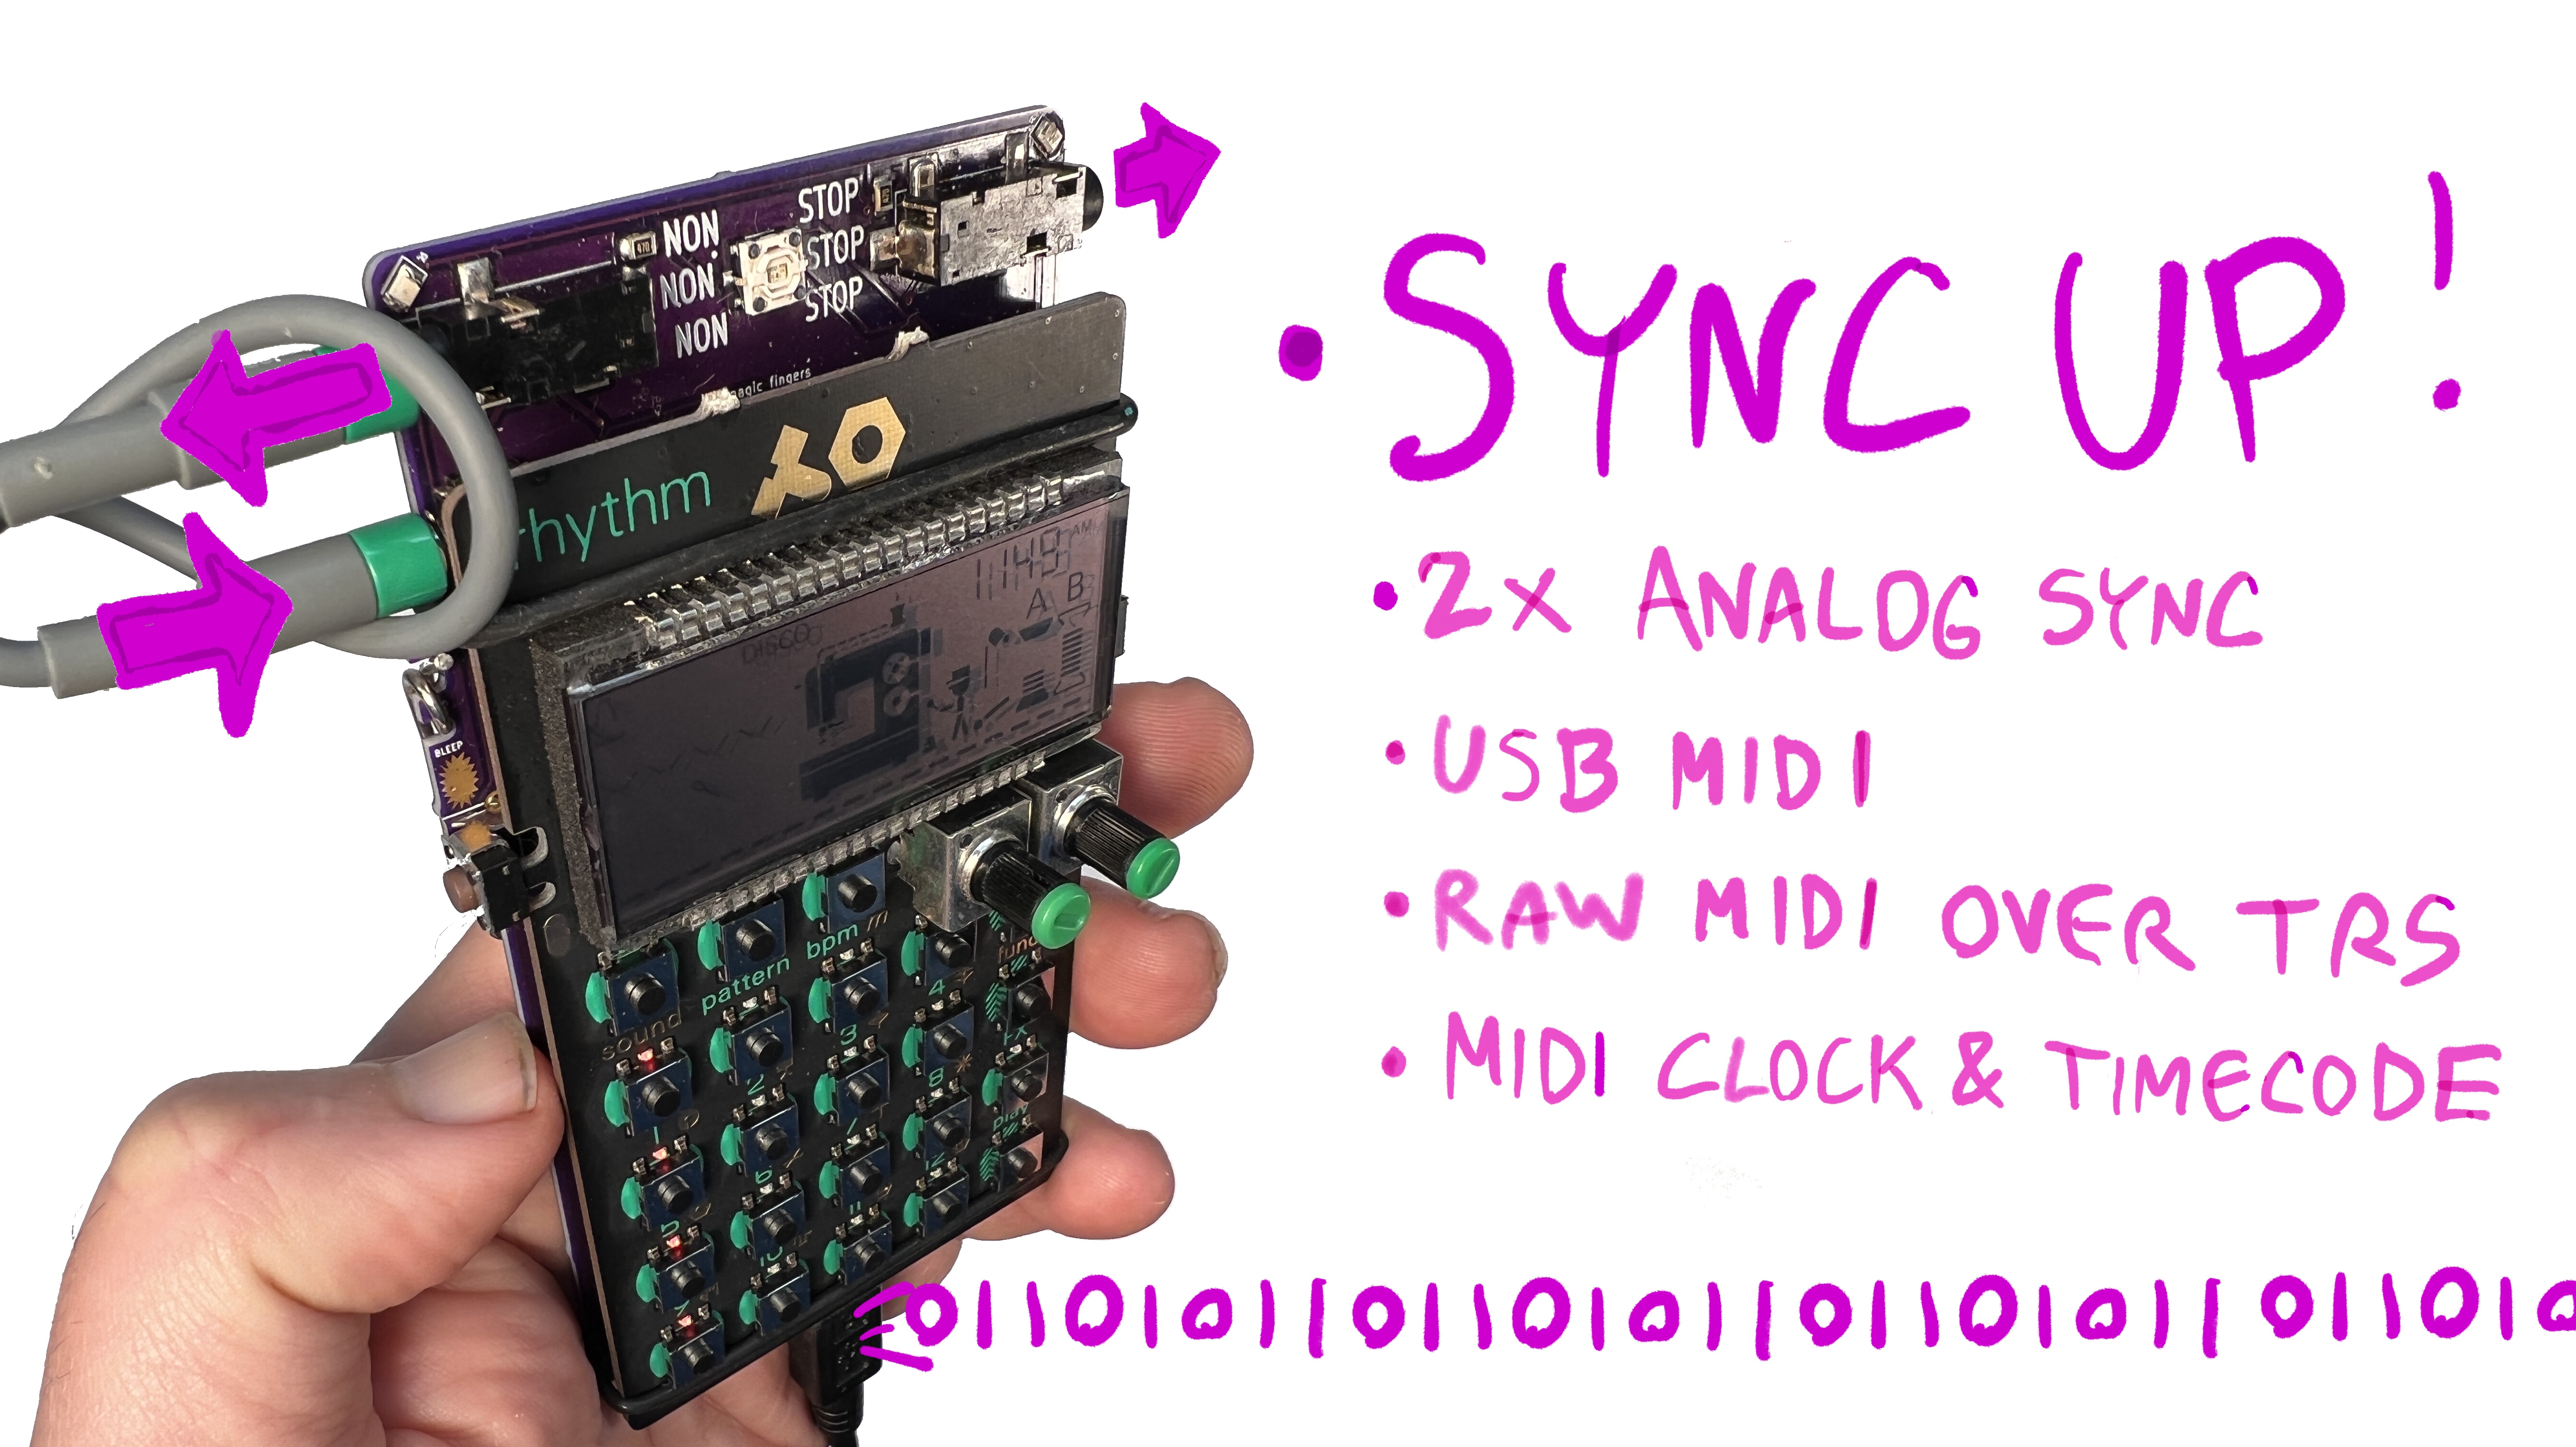 Our Guide to the Teenage Engineering Pocket Operator Range